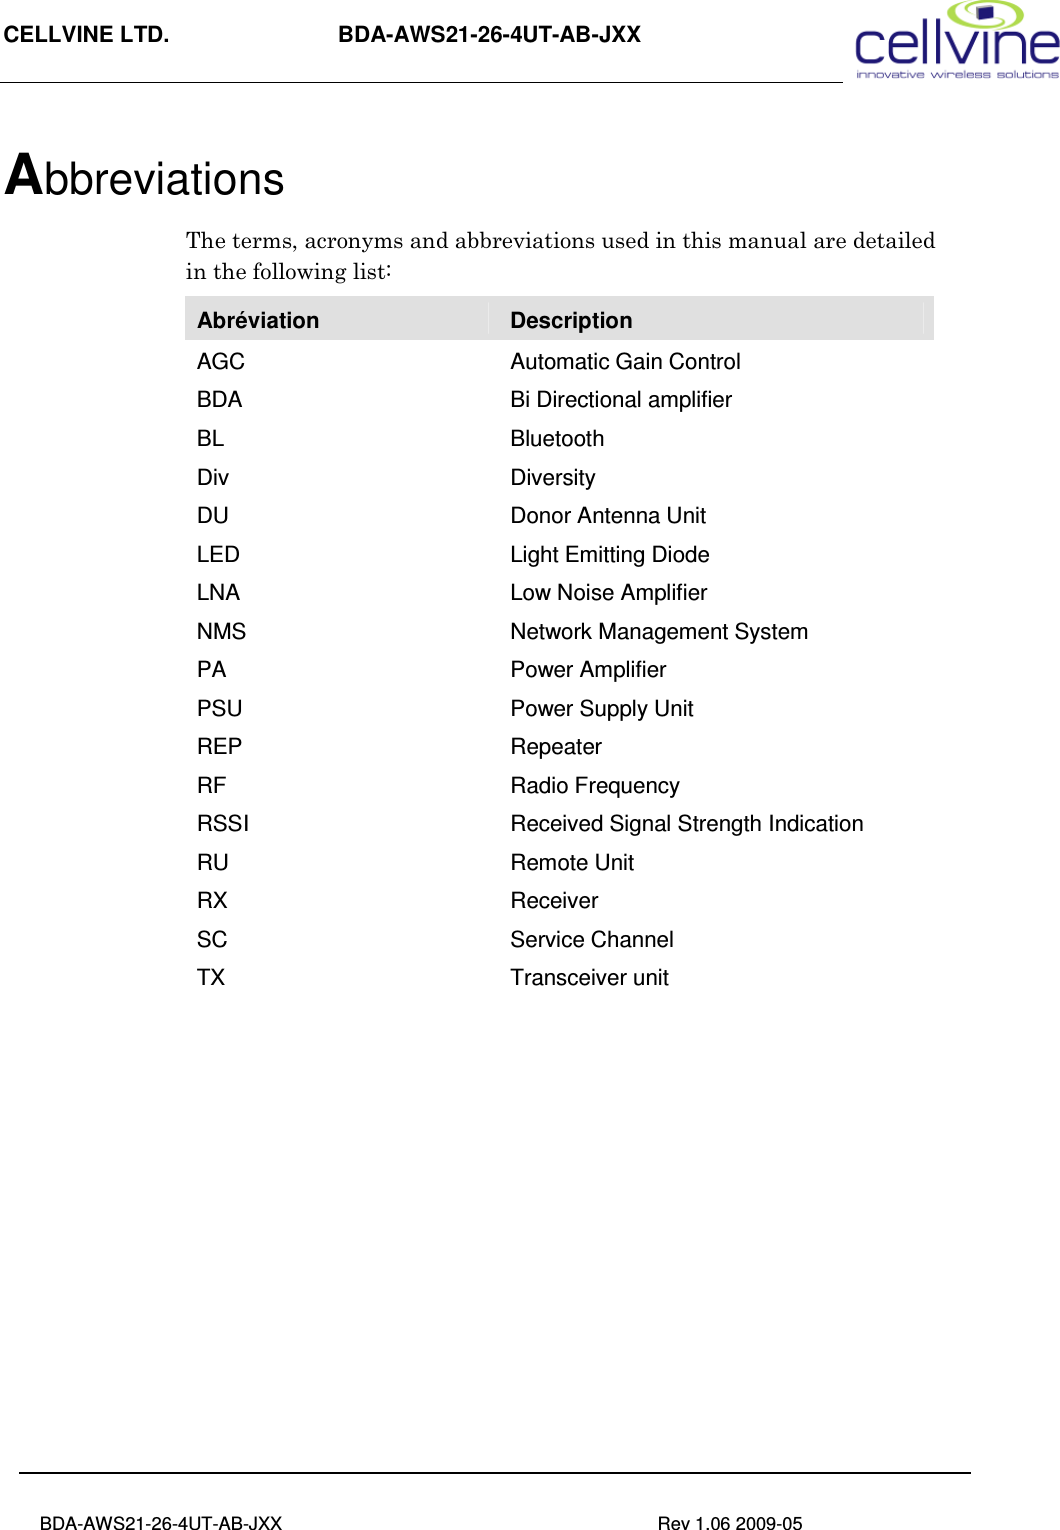 CELLVINE LTD.                      BDA-AWS21-26-4UT-AB-JXX                                                 BDA-AWS21-26-4UT-AB-JXX                                                                          Rev 1.06 2009-05                                      Abbreviations  The terms, acronyms and abbreviations used in this manual are detailed in the following list: Abréviation  Description AGC  Automatic Gain Control BDA   Bi Directional amplifier BL  Bluetooth Div   Diversity DU  Donor Antenna Unit LED  Light Emitting Diode LNA  Low Noise Amplifier NMS  Network Management System PA  Power Amplifier PSU  Power Supply Unit REP  Repeater RF  Radio Frequency RSSI  Received Signal Strength Indication RU  Remote Unit RX  Receiver SC  Service Channel TX  Transceiver unit  